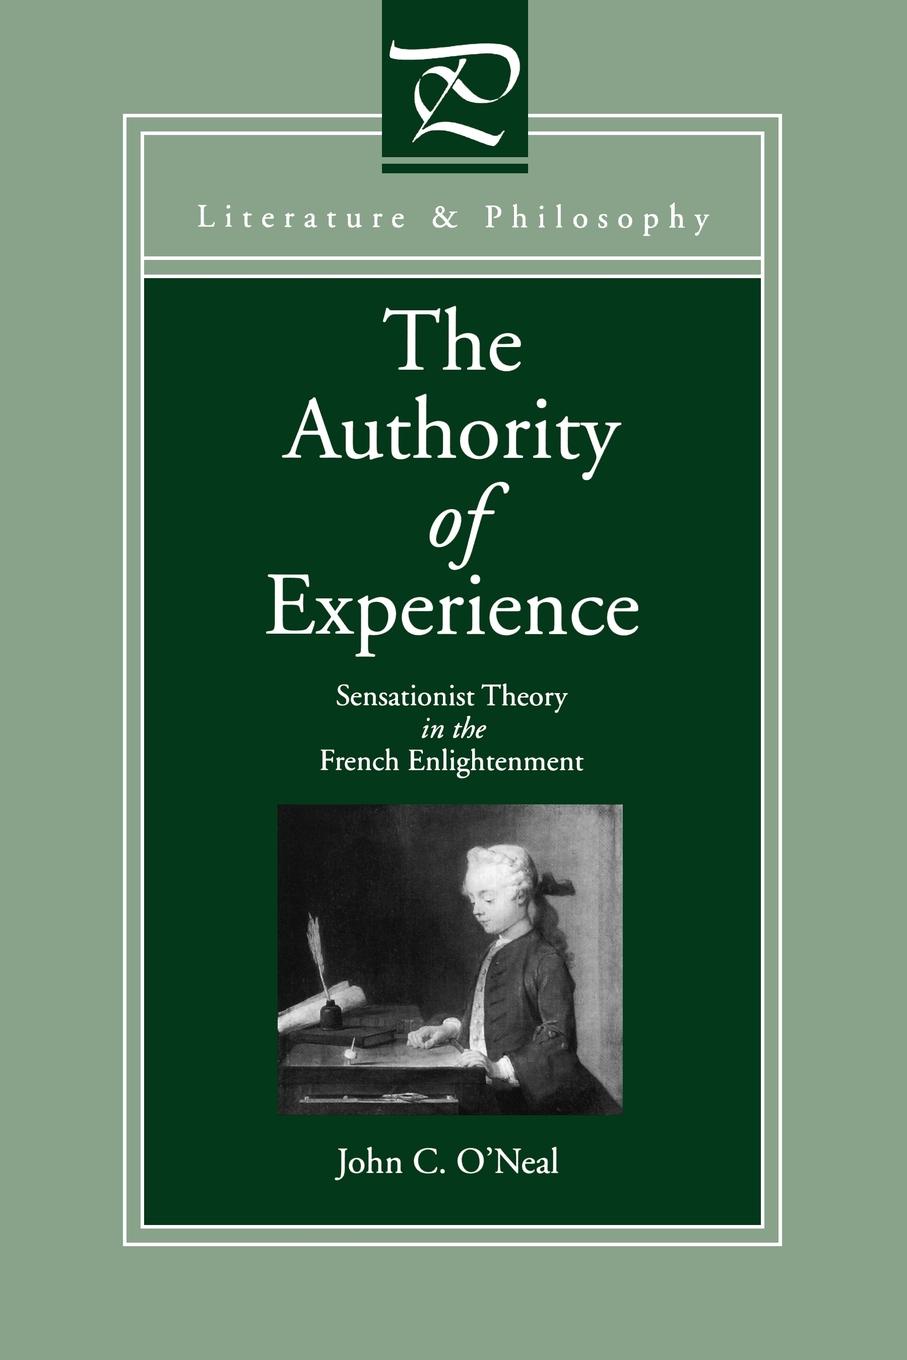 John C. O'Neal The Authority of Experience. Sensationist Theory in the French Enlightenment